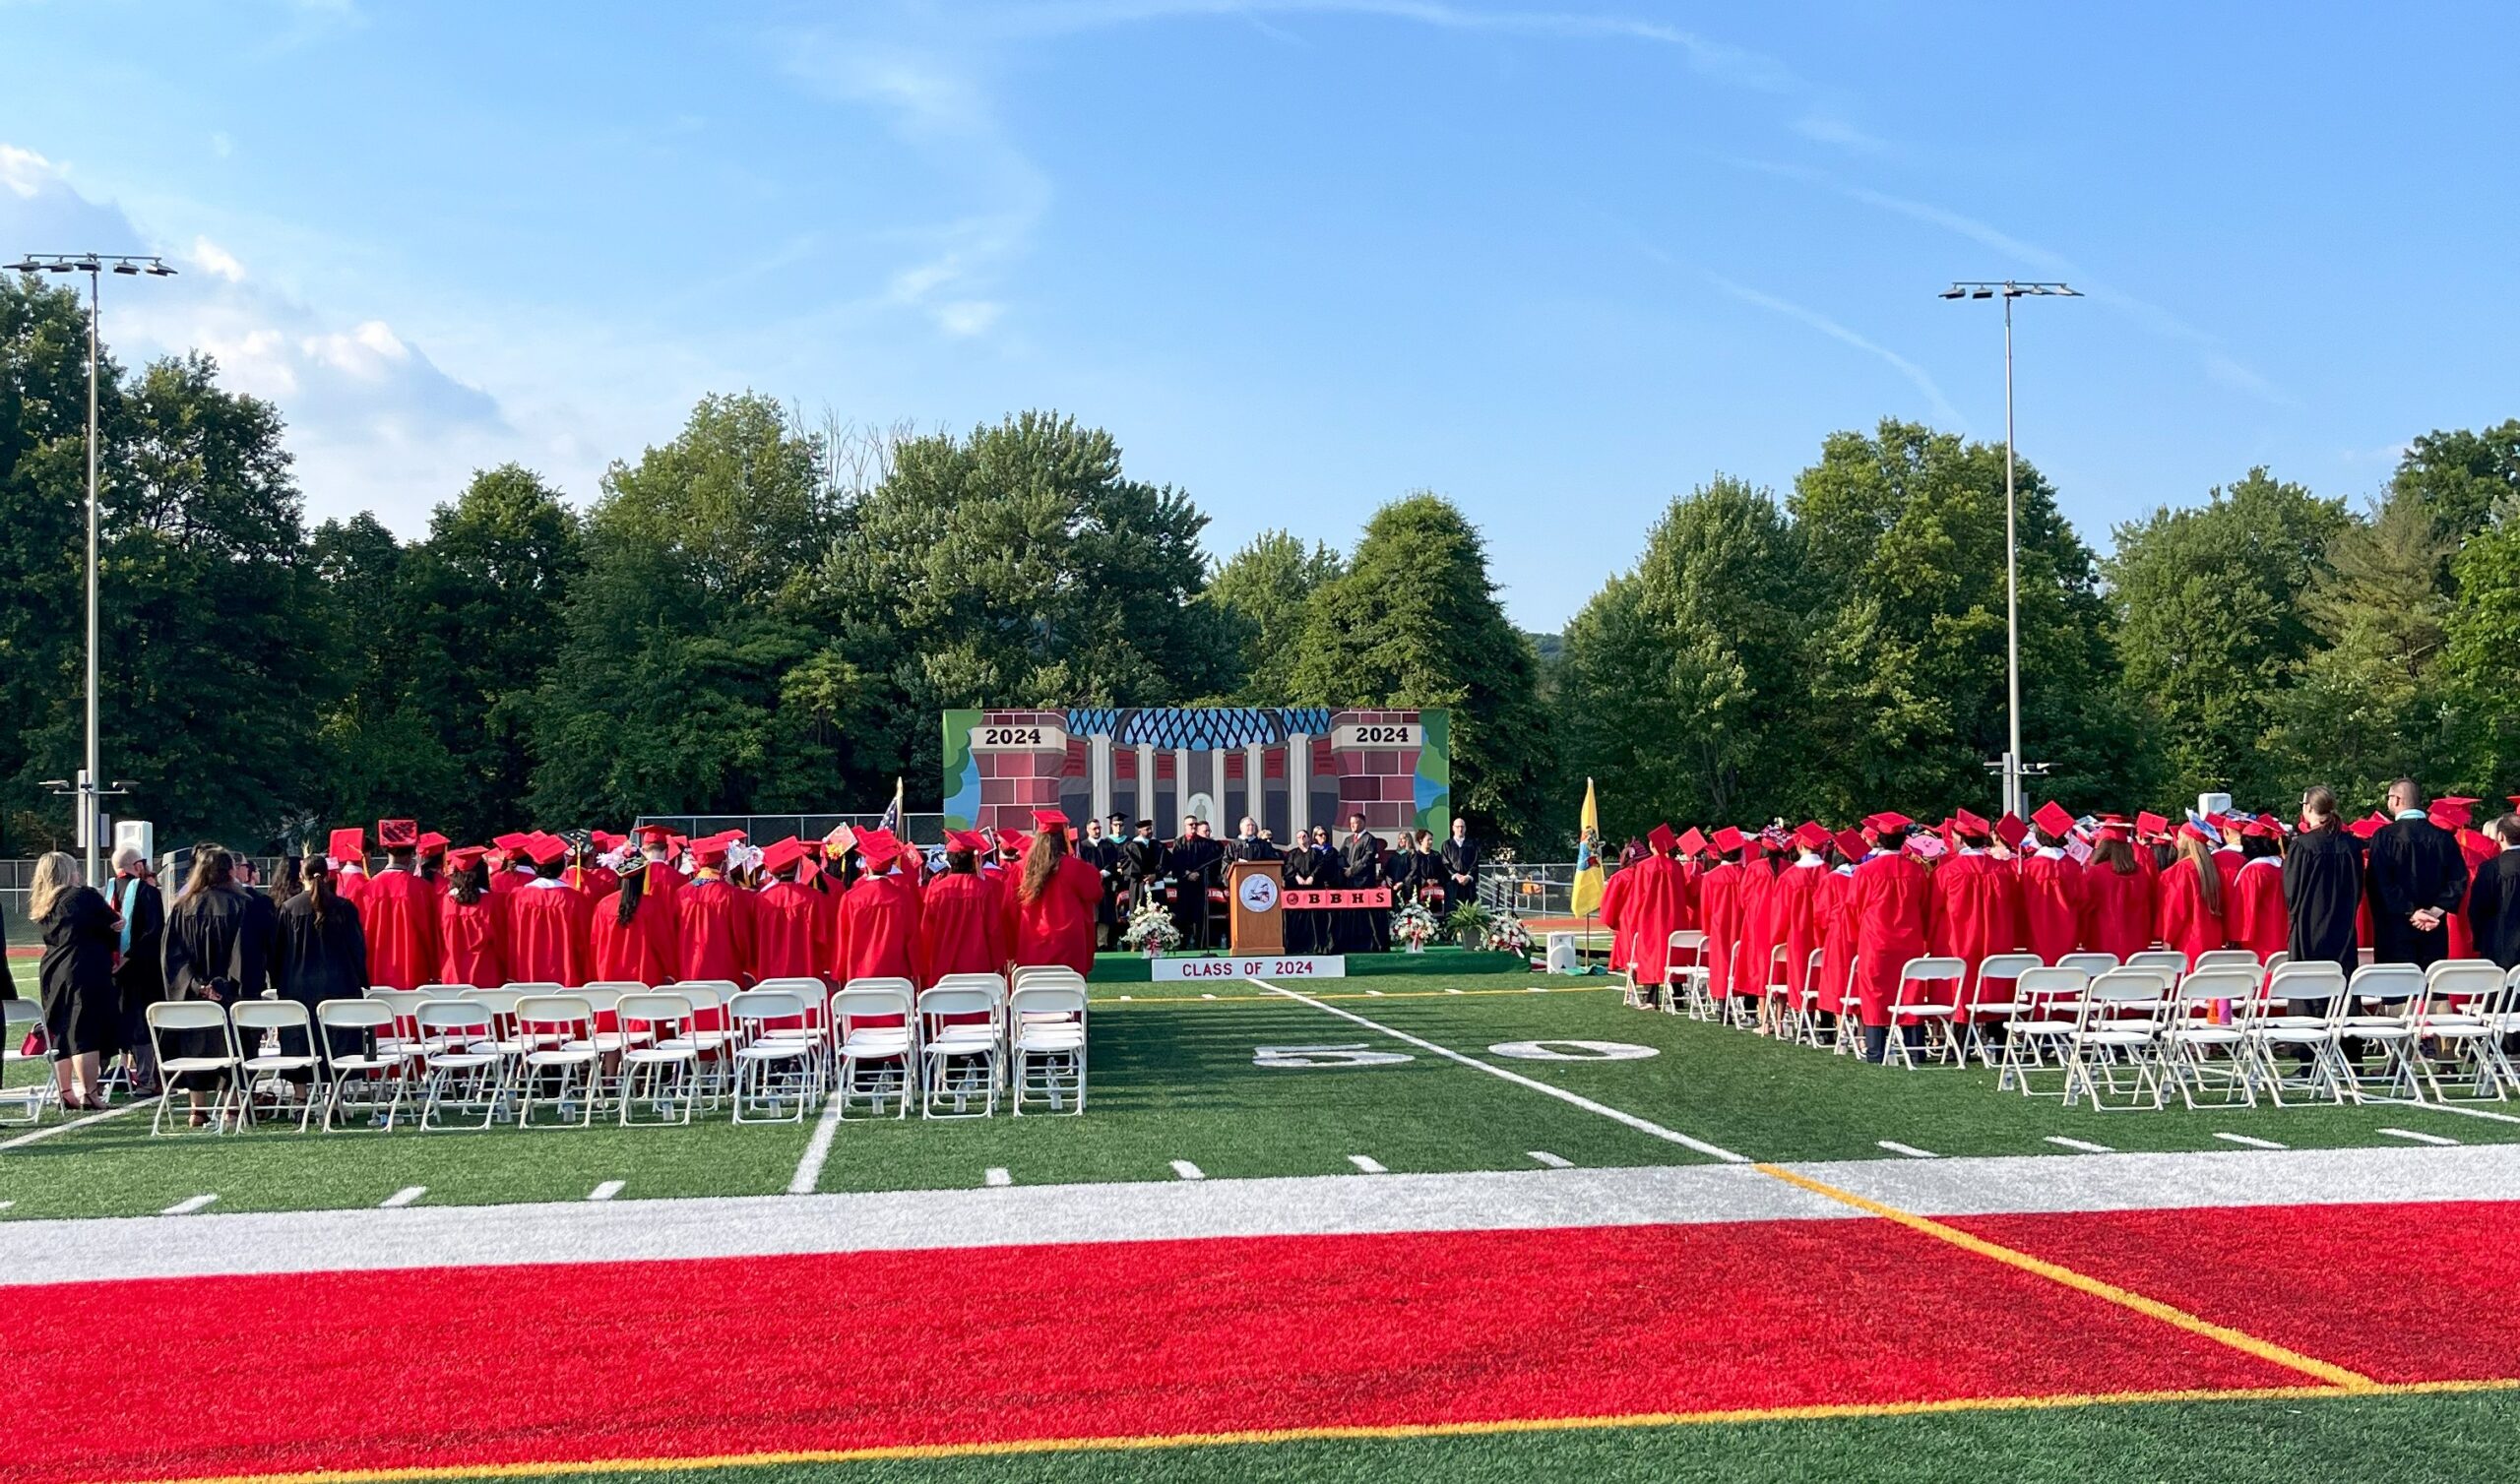 The class of 2024 excitedly sit on the field facing the stage where Principal Edward Smith address the graduates.